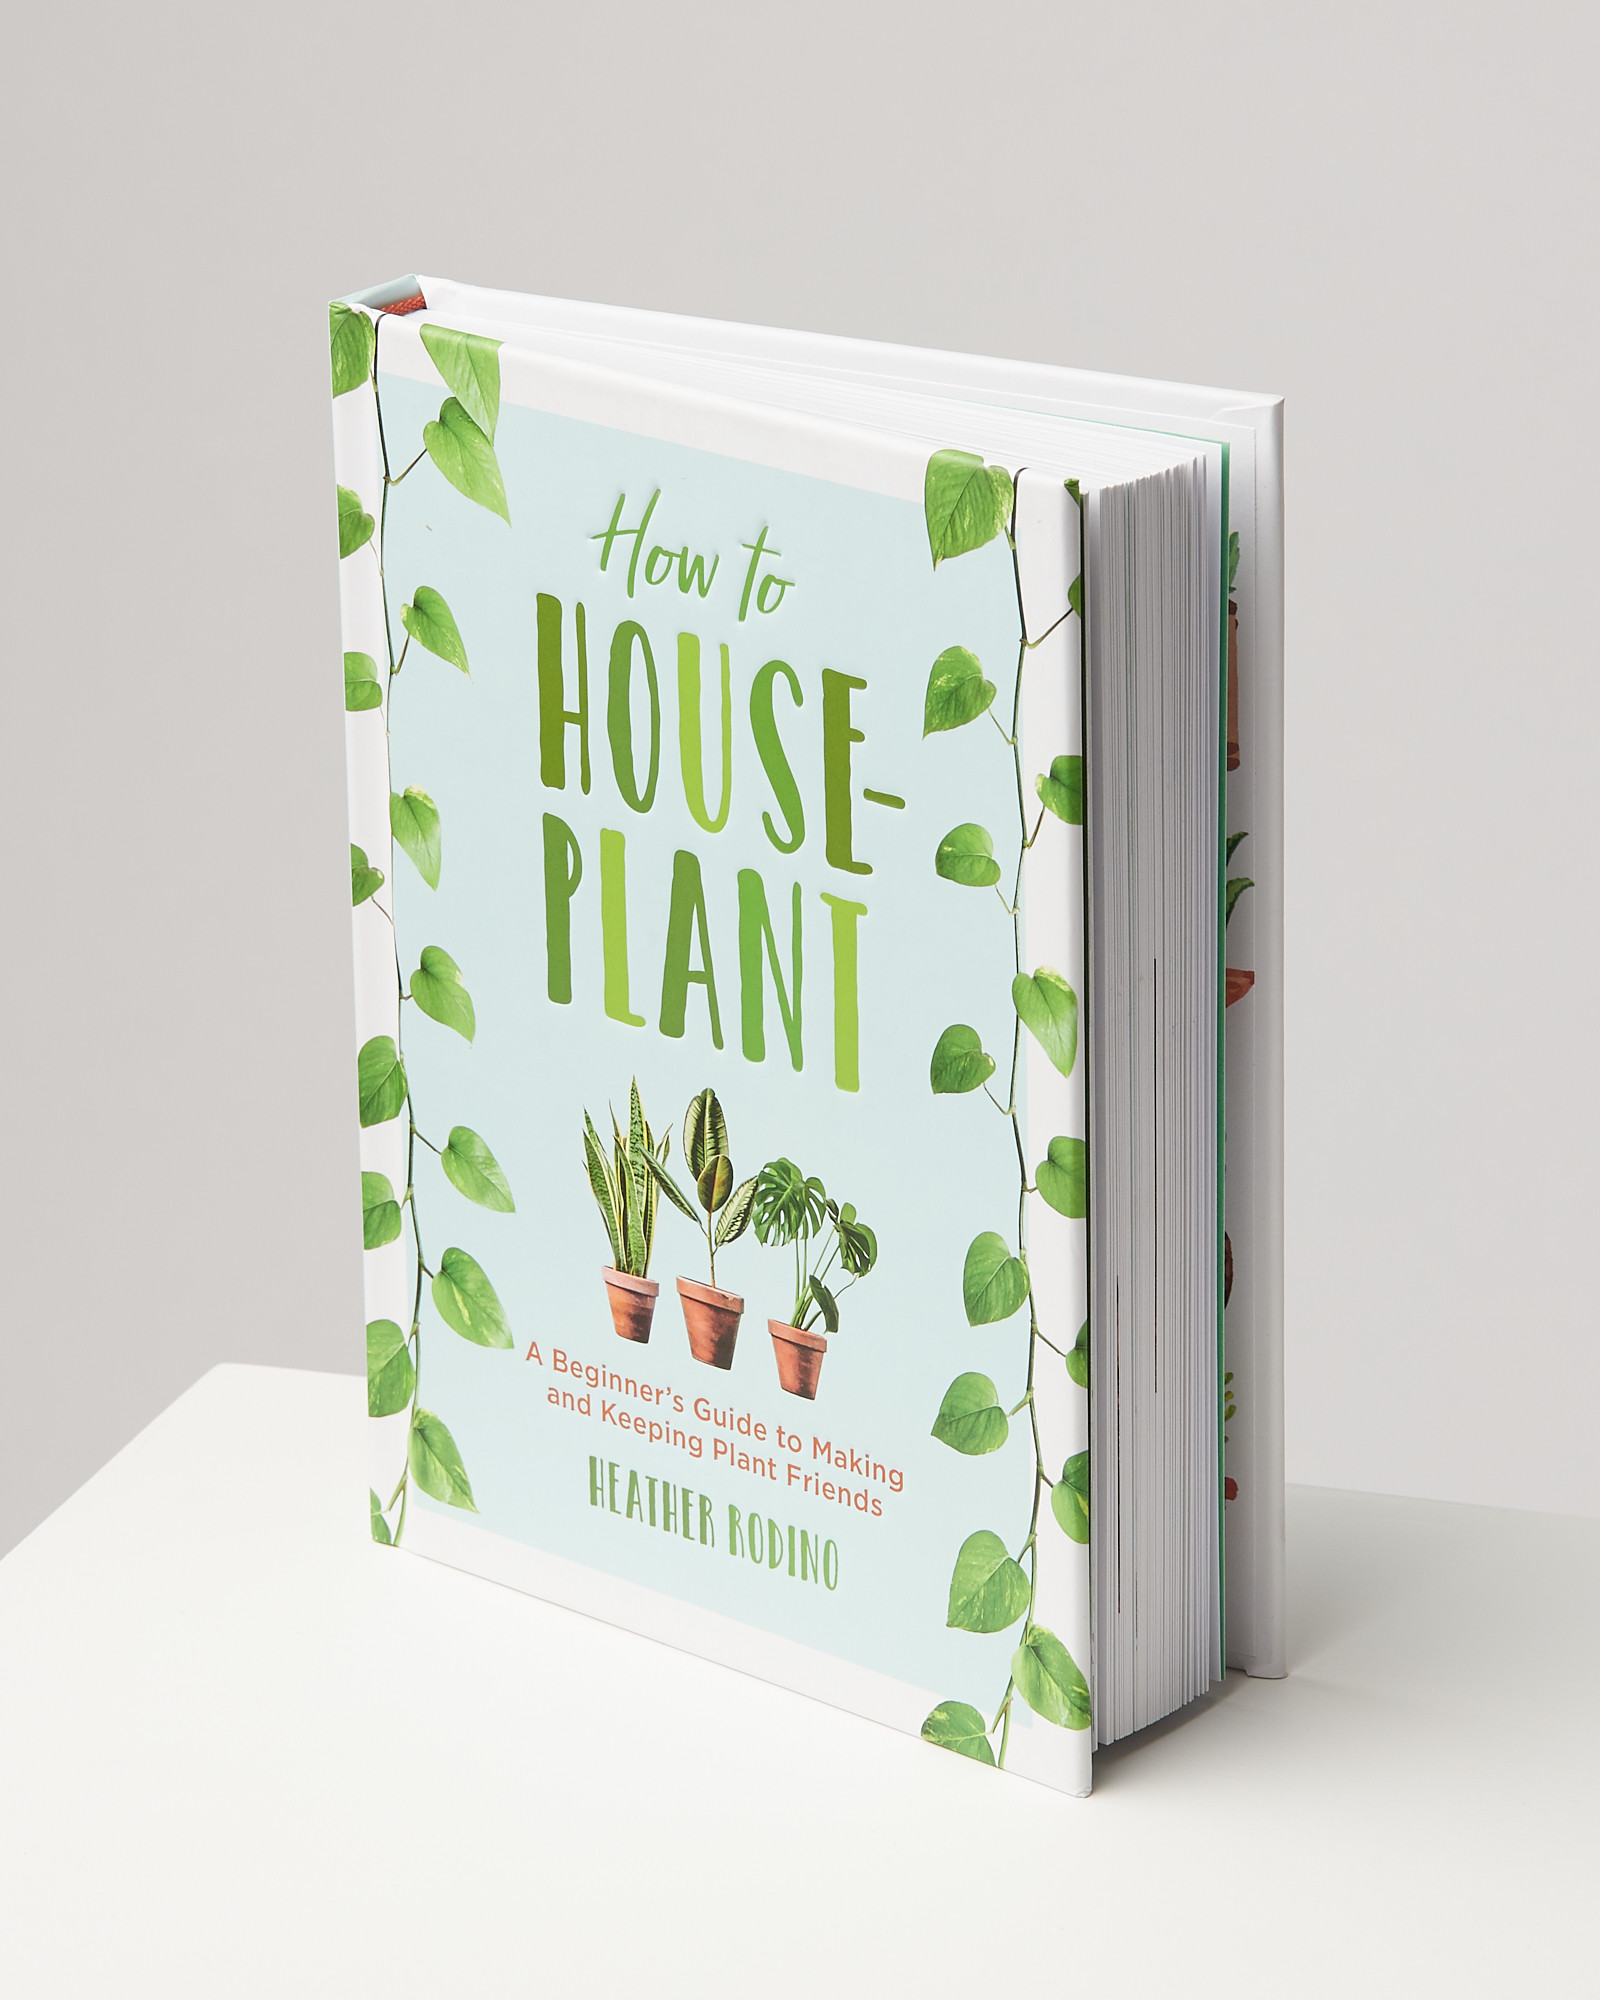 How To House Plant By Heather Rodino - Lotus Gallery